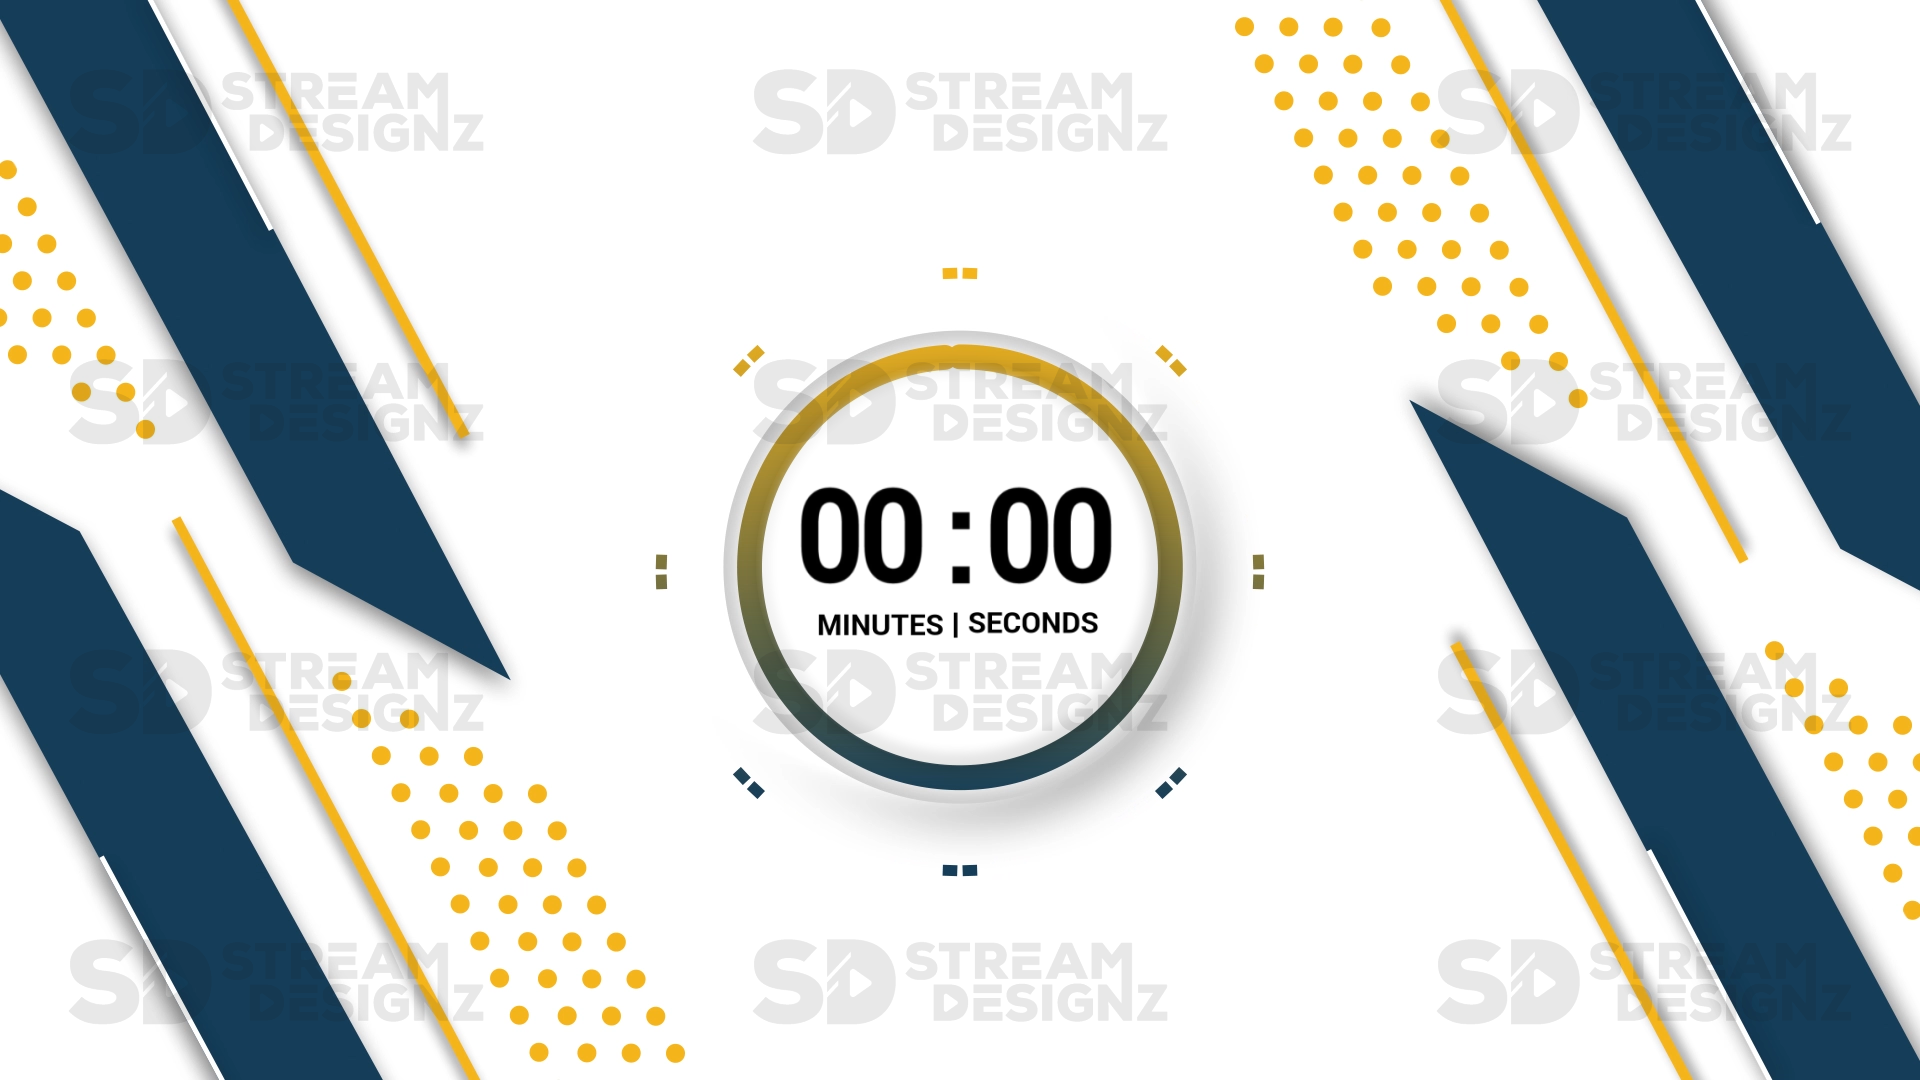 5 minute count up timer sleek yellow and blue preview video stream designz